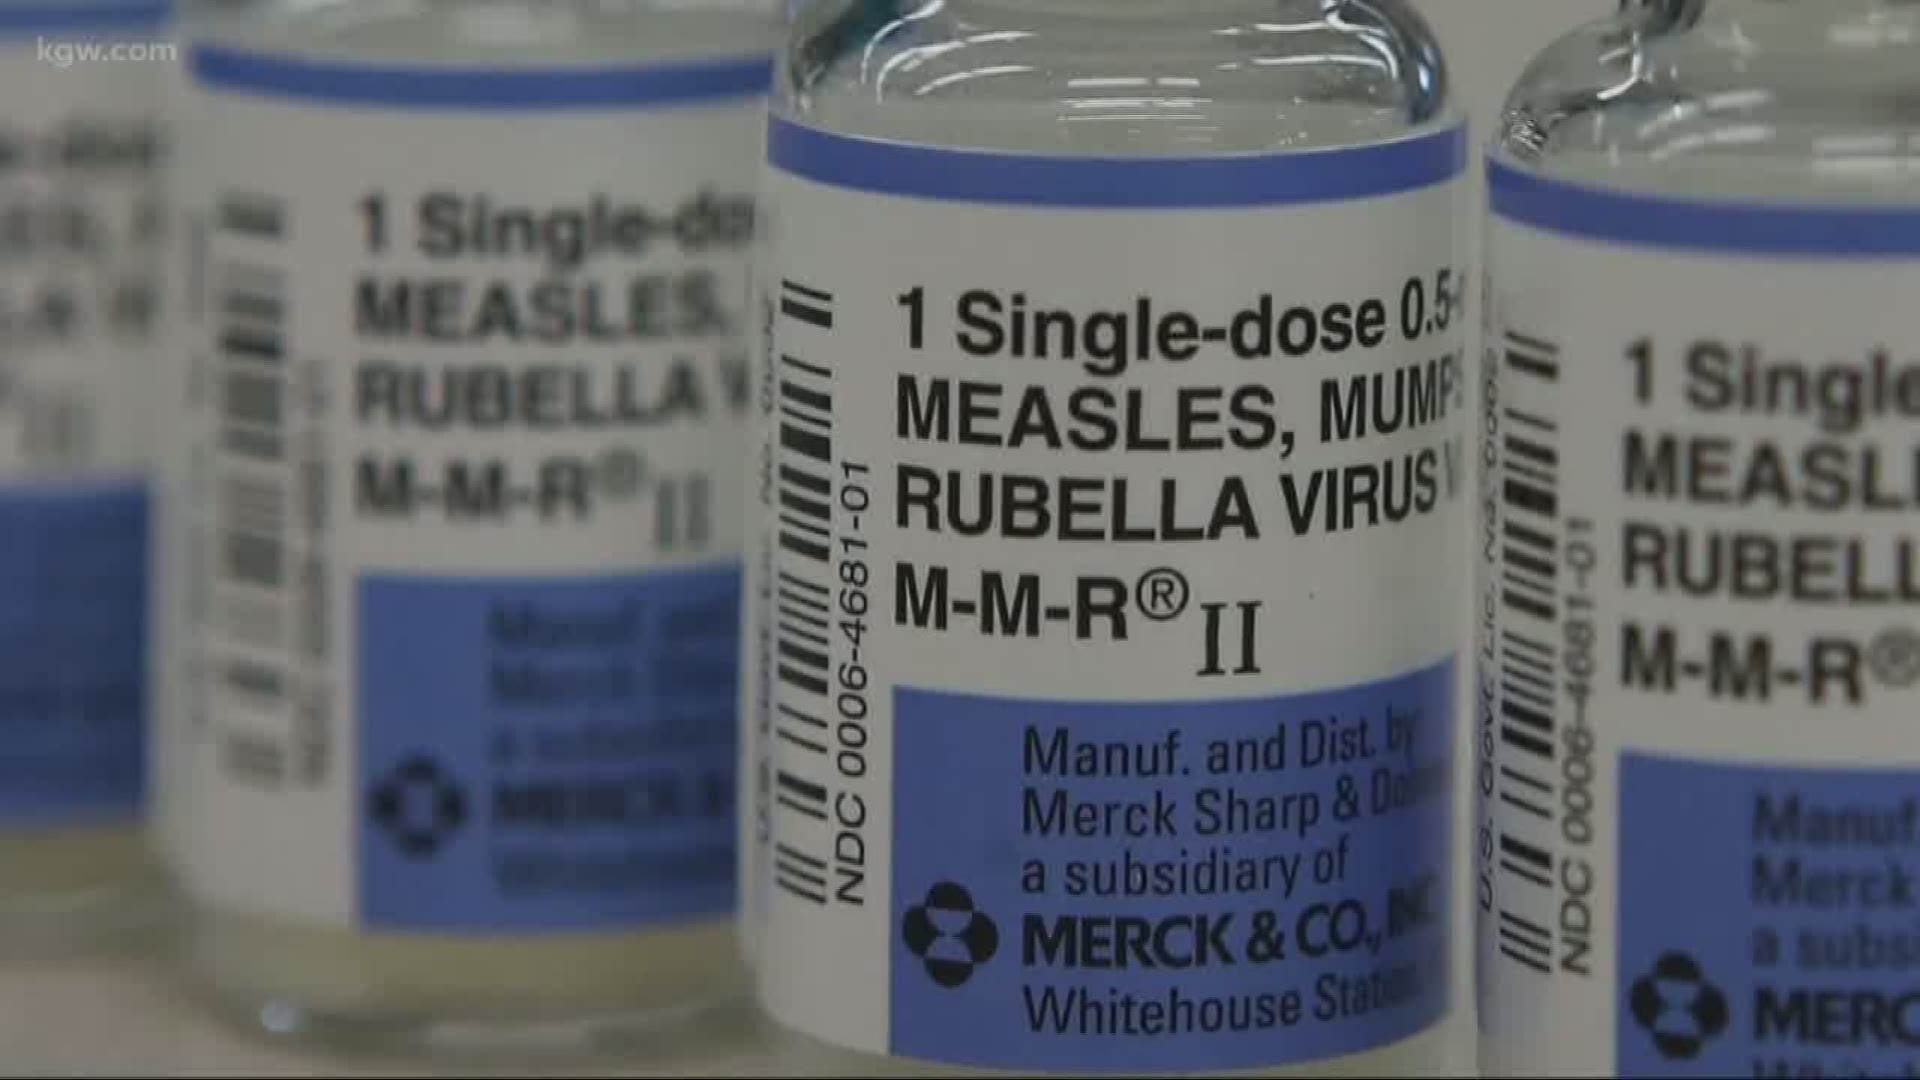 Another case of measles confirmed in Portland metro area